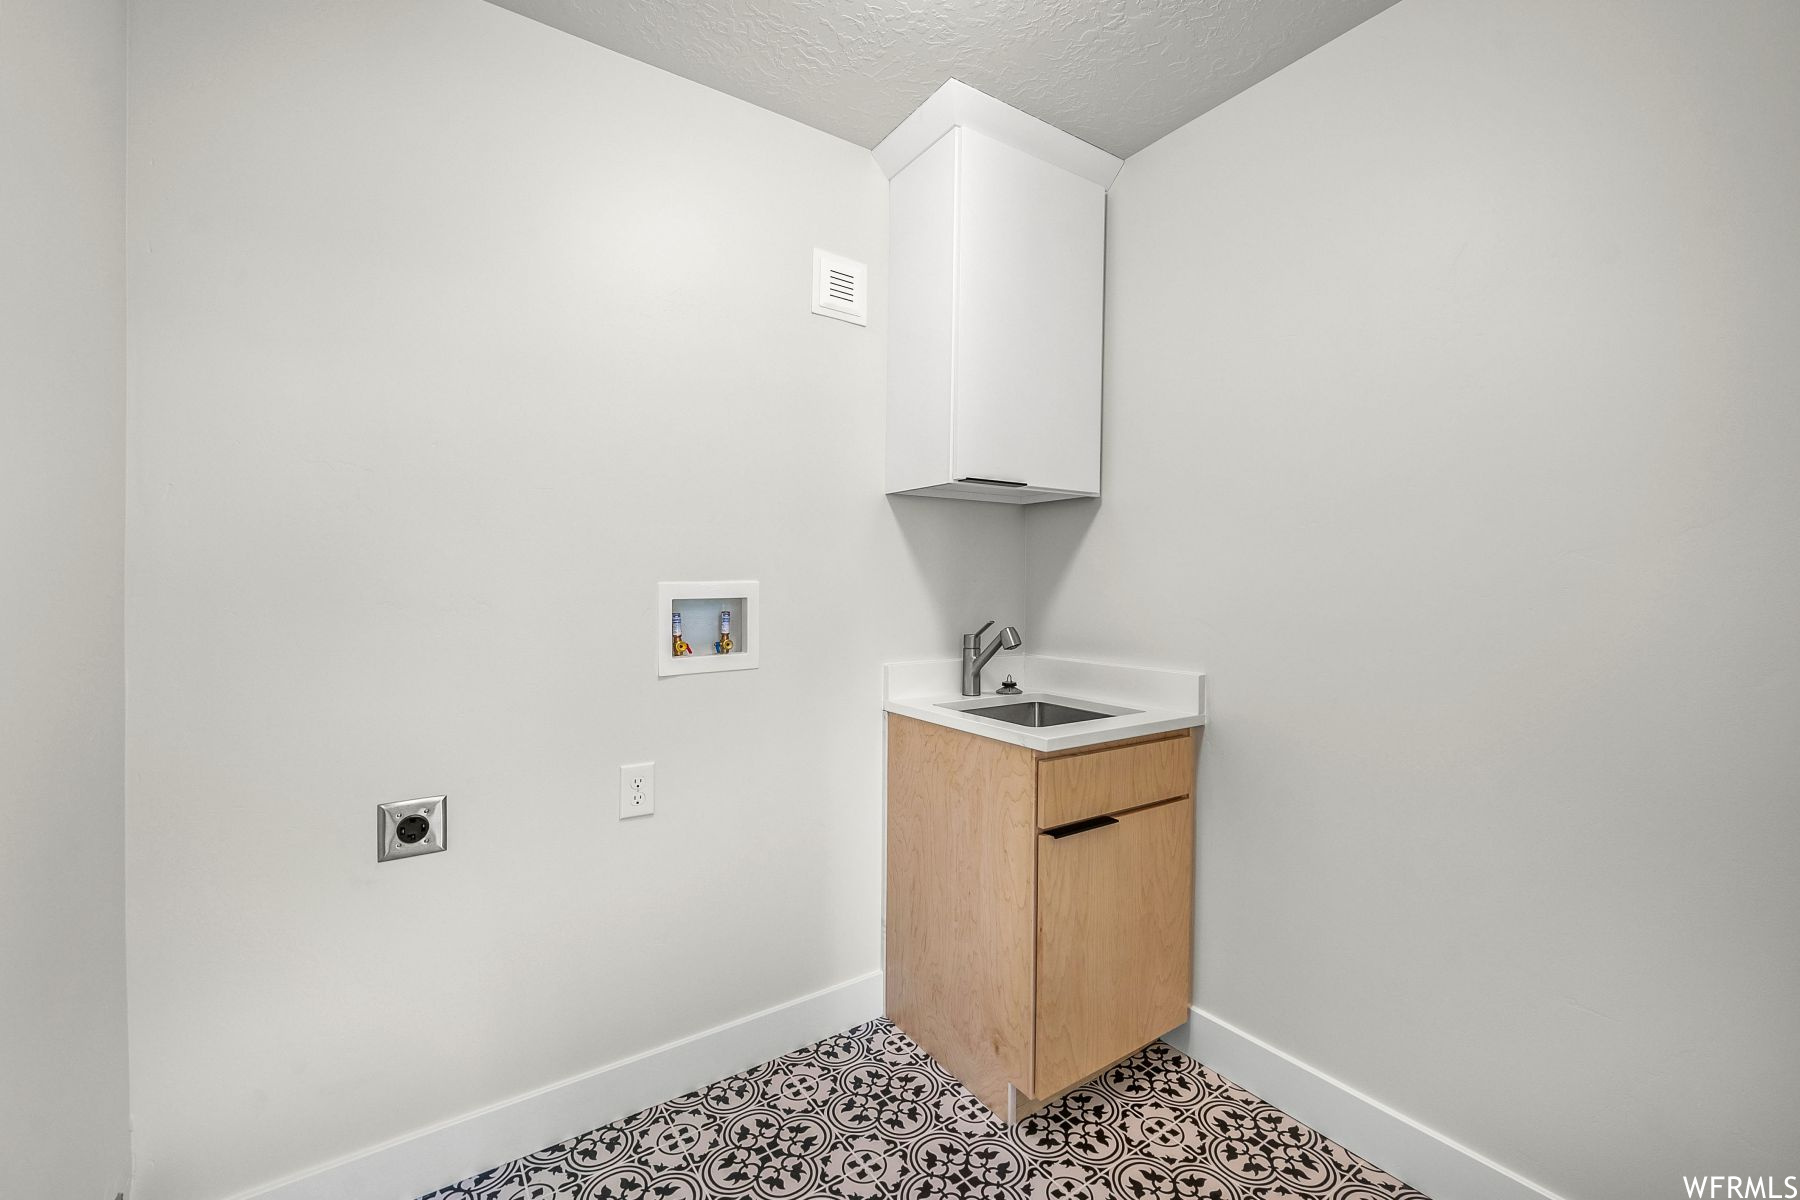 Laundry room with cabinets, light tile floors, hookup for an electric dryer, hookup for a washing machine, and sink